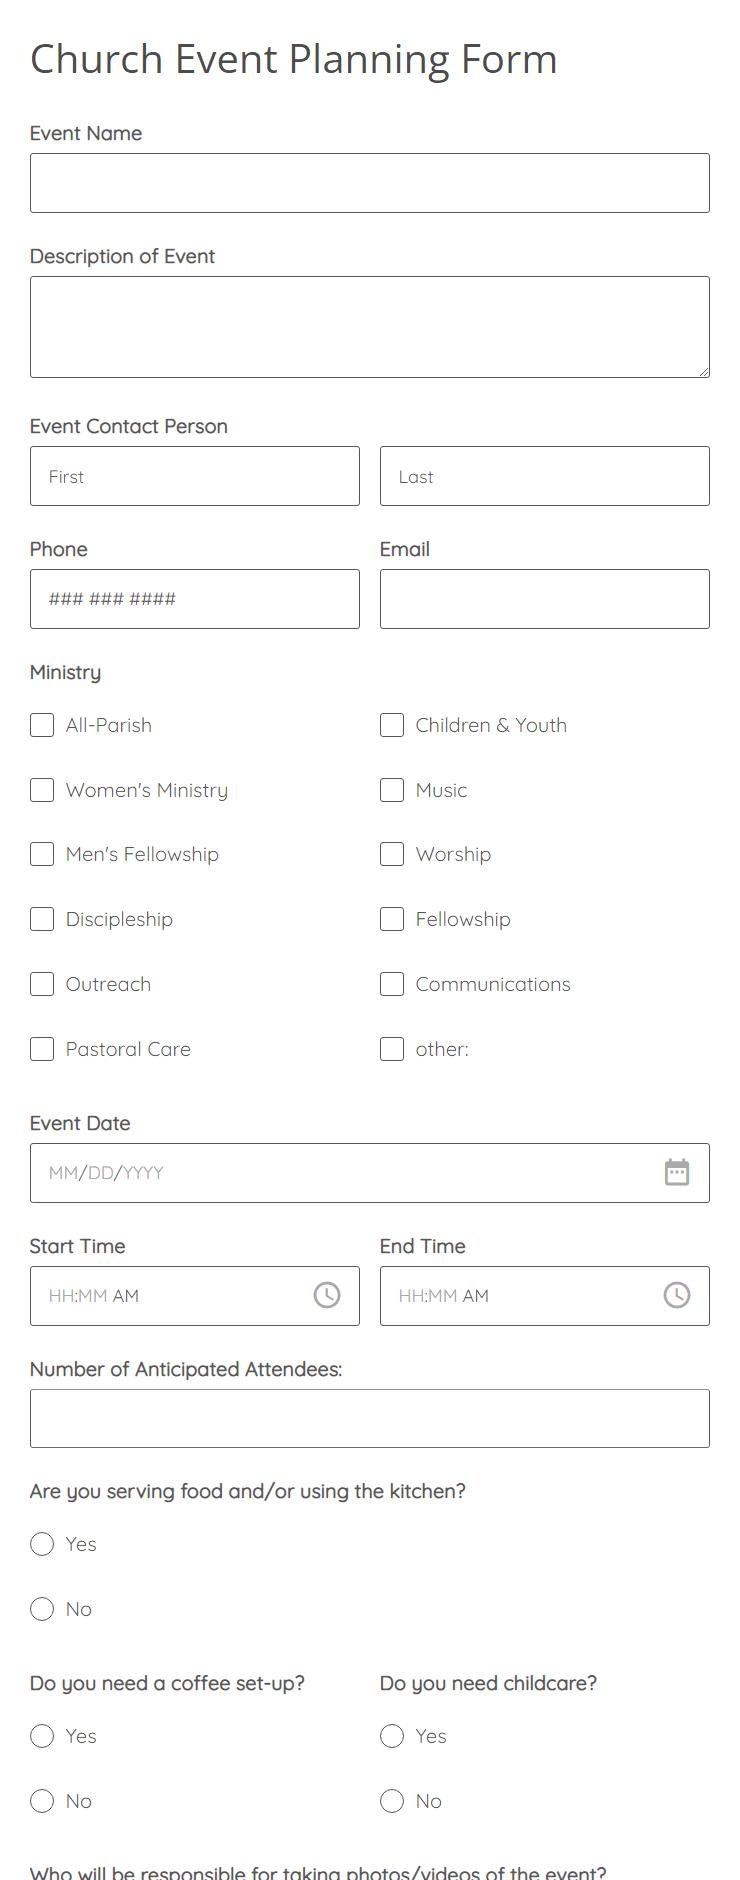 Church Event Planning Form Template 123FormBuilder